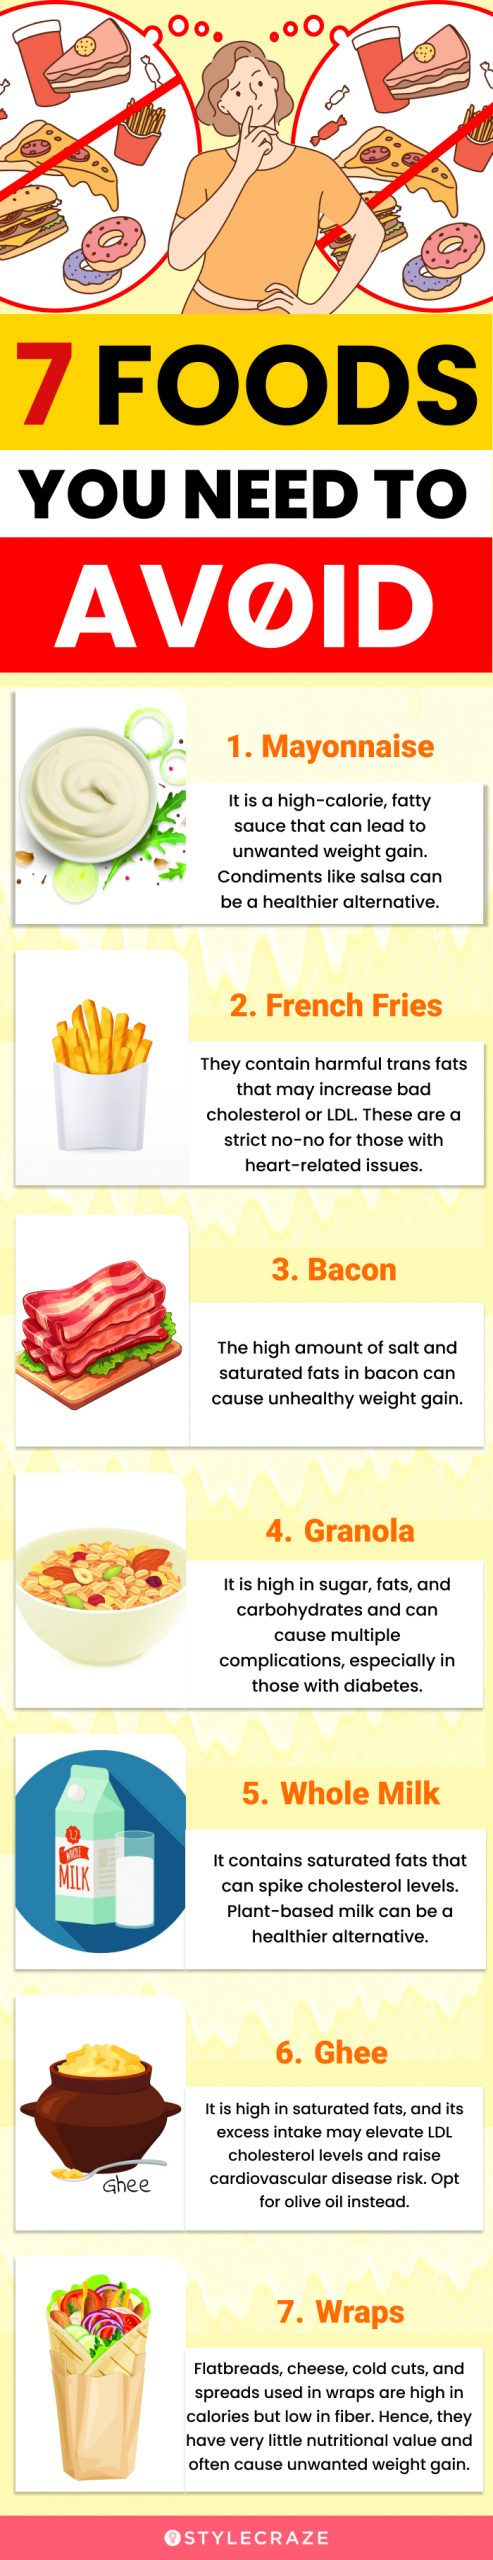 7 foods you need to avoid (infographic)